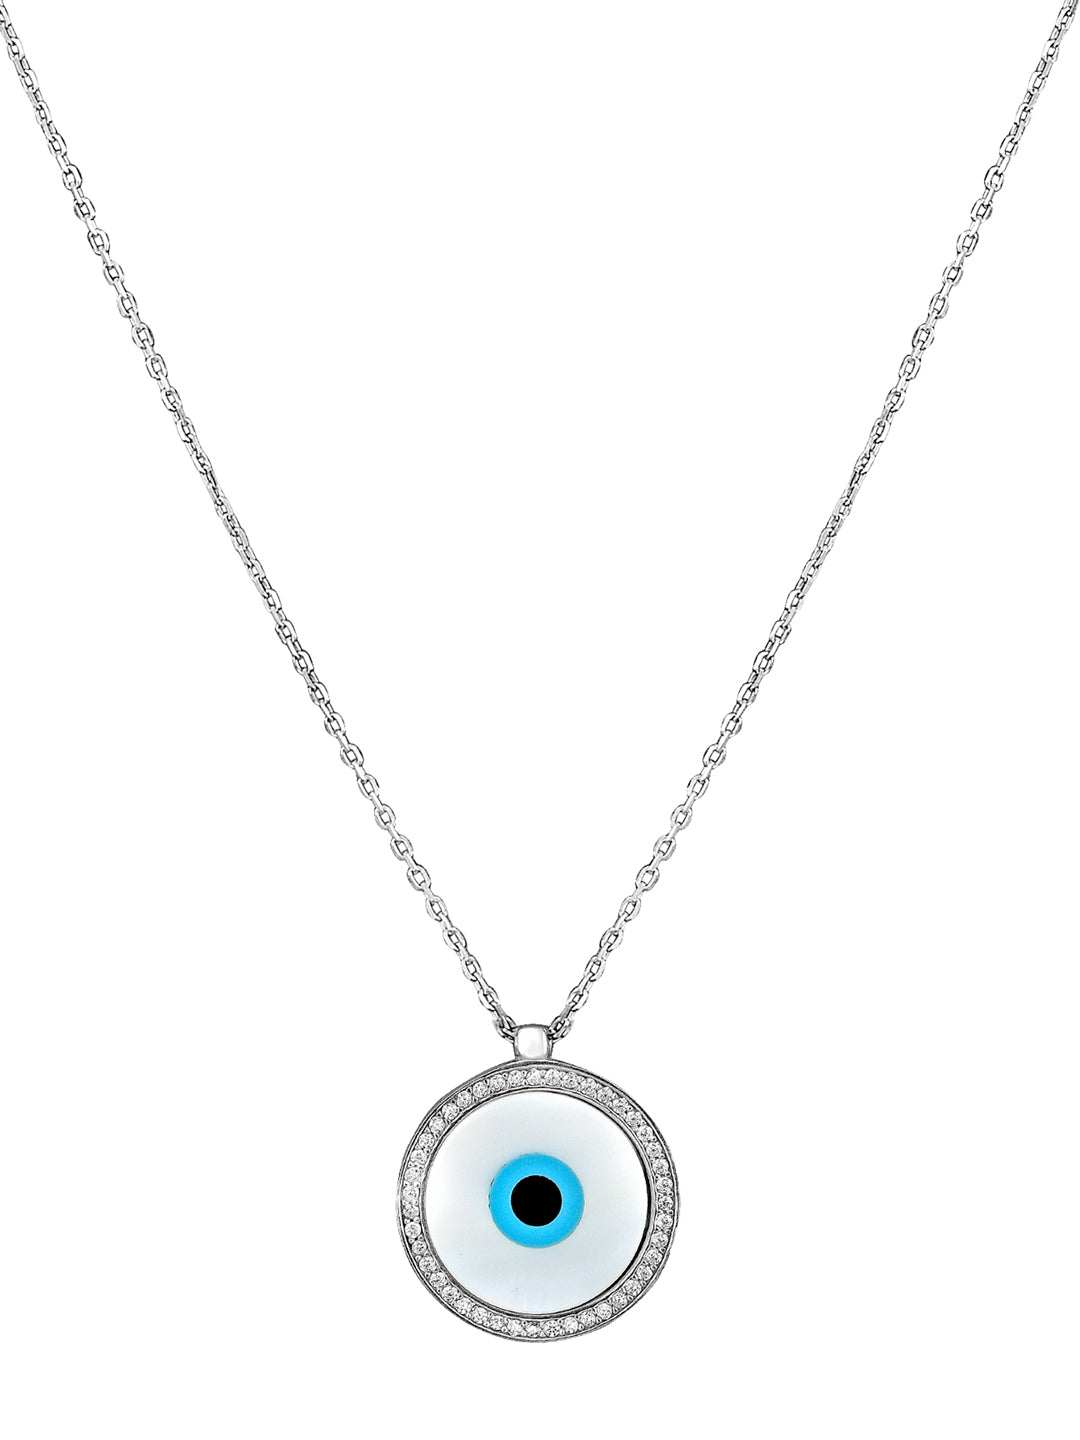 Amazon.com: 14k Gold Evil Eye Pendant Necklace, Solid Gold Evil Eye Charm  Necklace, Turkish Blue Eye Cable Chain Necklace, 4 Different Sizes 7mm 9mm  12mm 17mm Evil Eye Necklace Great Gift for